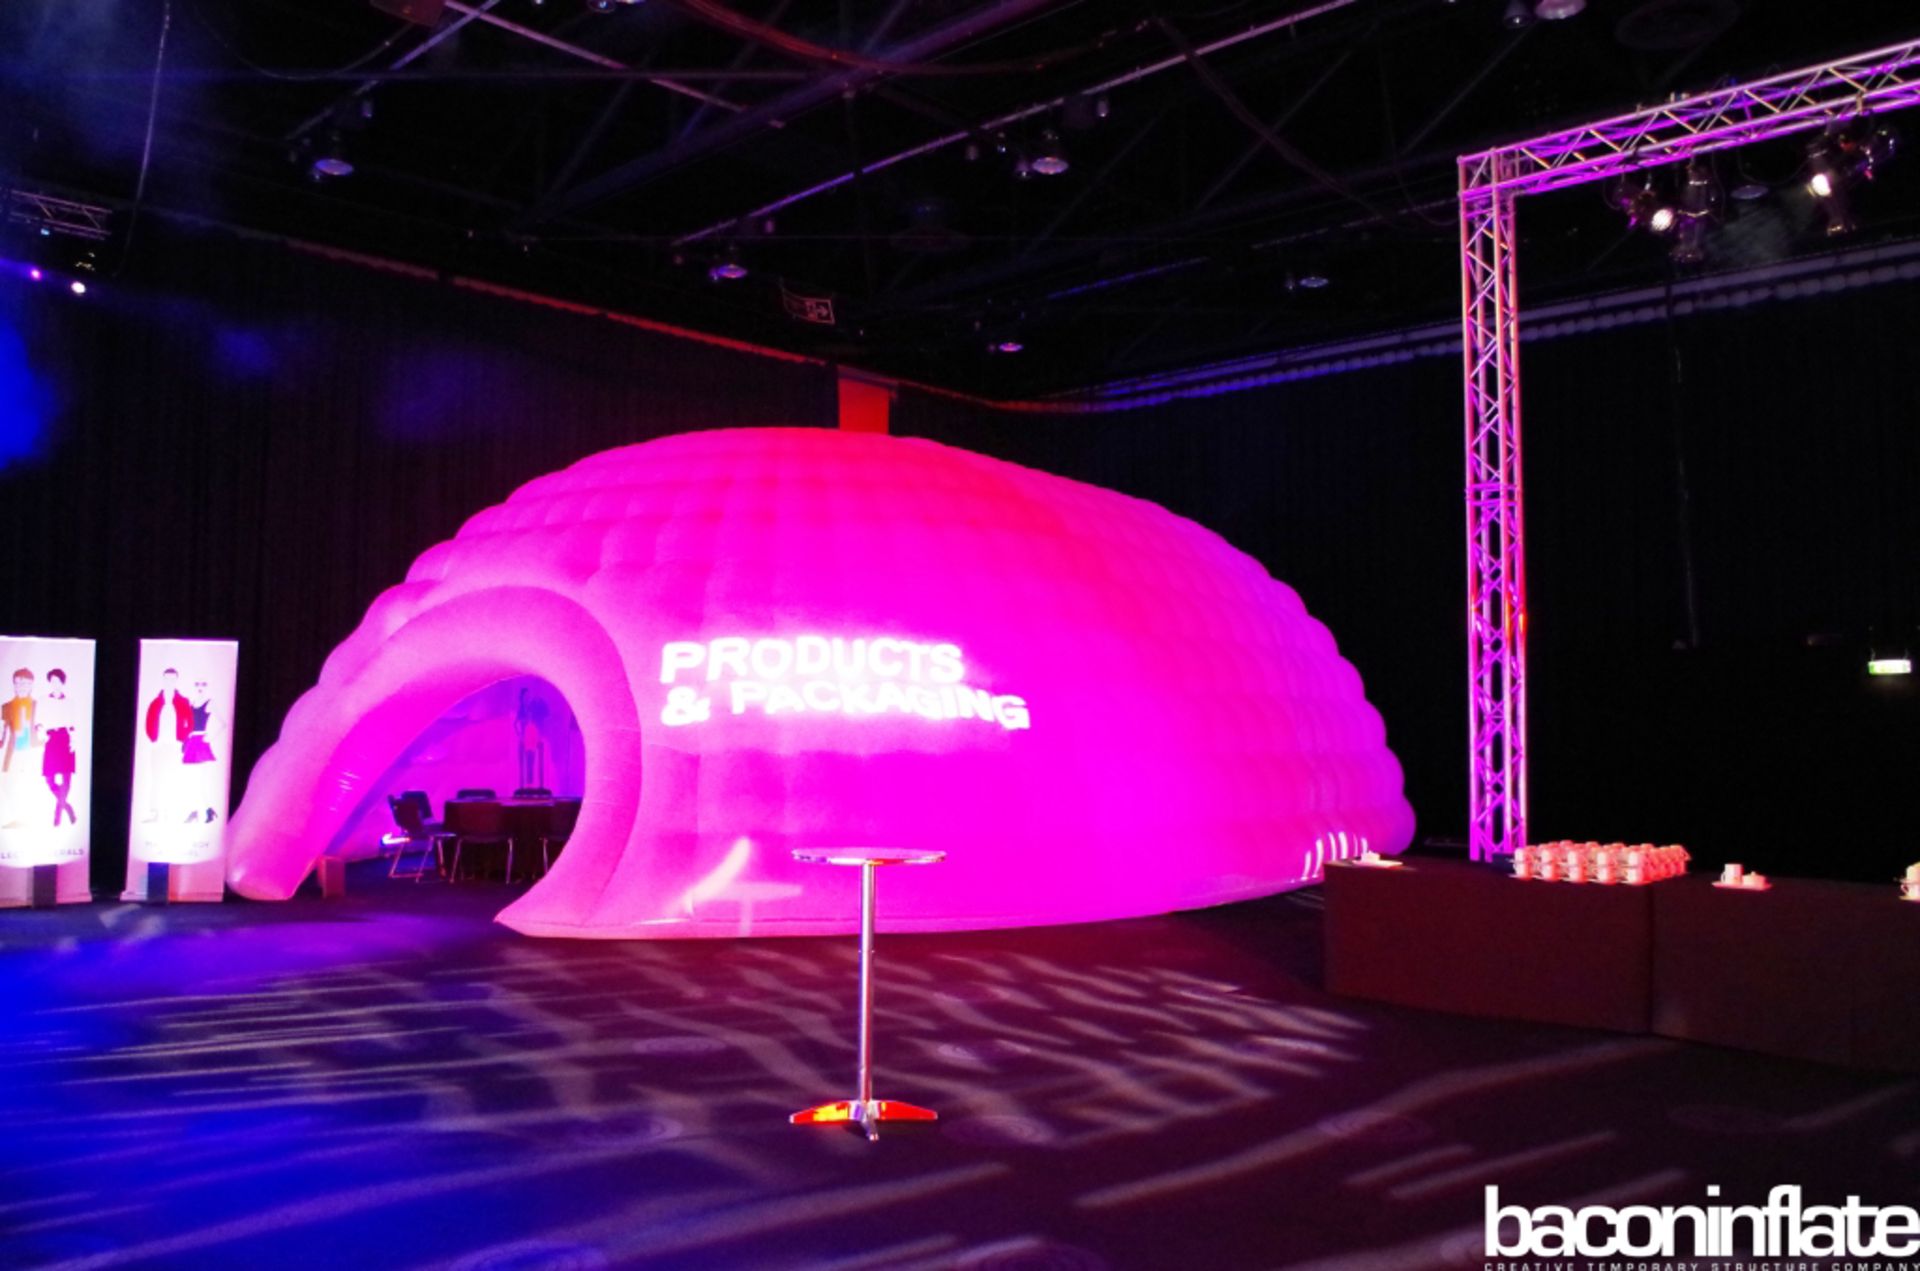 10m/ 10m x 15m IndoorHaus Internal Inflatable Structure (Stock No; BiINDH10/03) (Located Northampton - Image 5 of 8